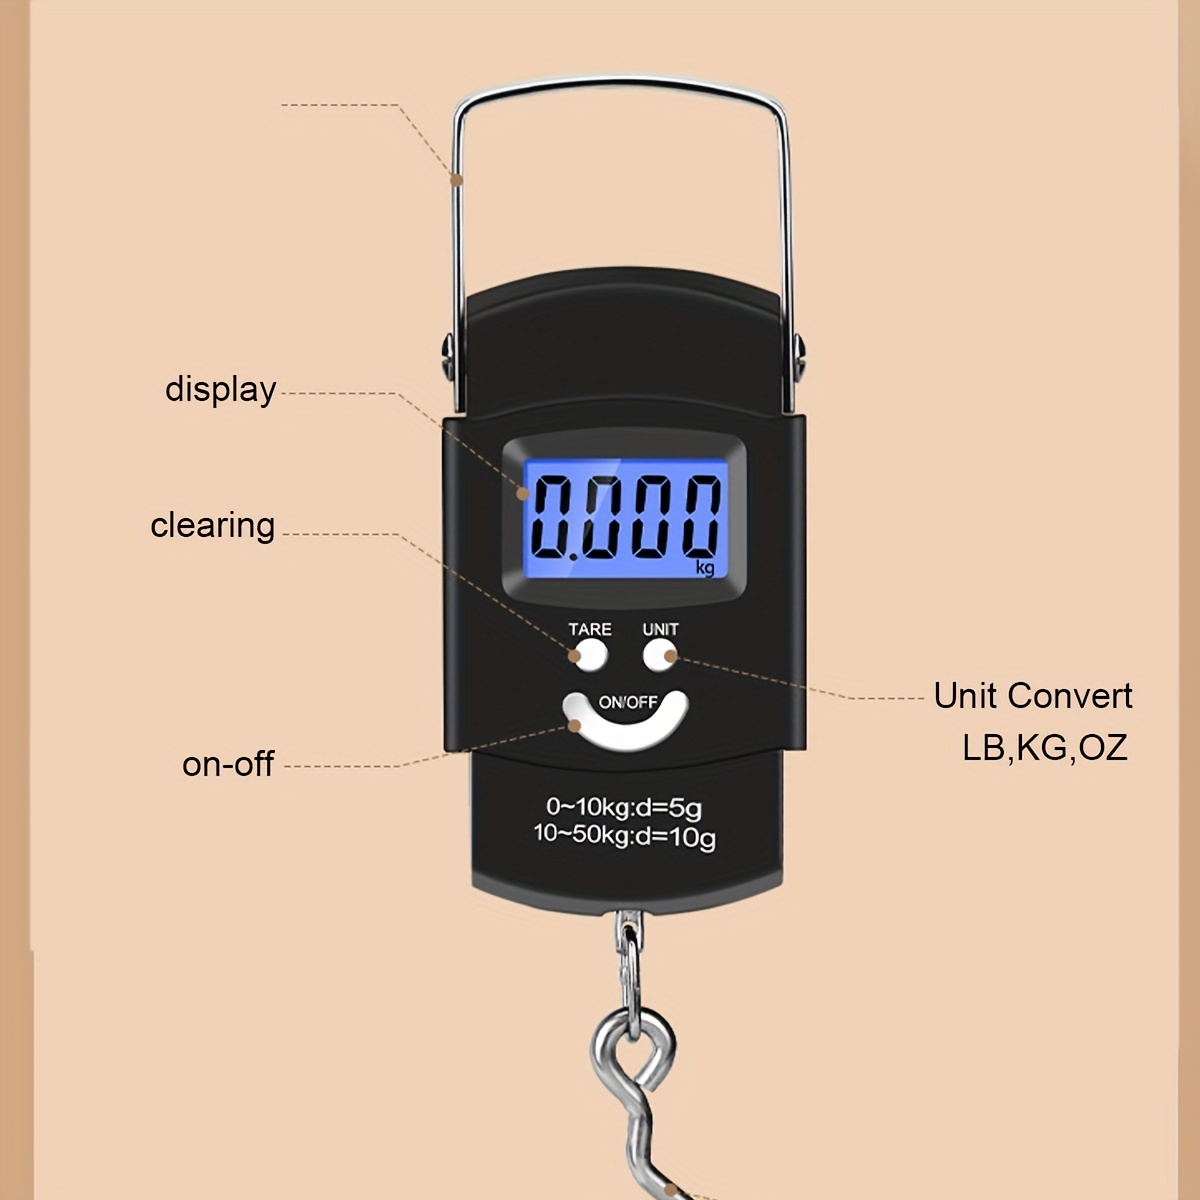 Fishing Scale,Max 110lb/50kg Luggage Scale Backlit LCD Screen Portable  Electronic Balance Digital Fish Hook Hanging Scale with Measuring Tape  Ruler.